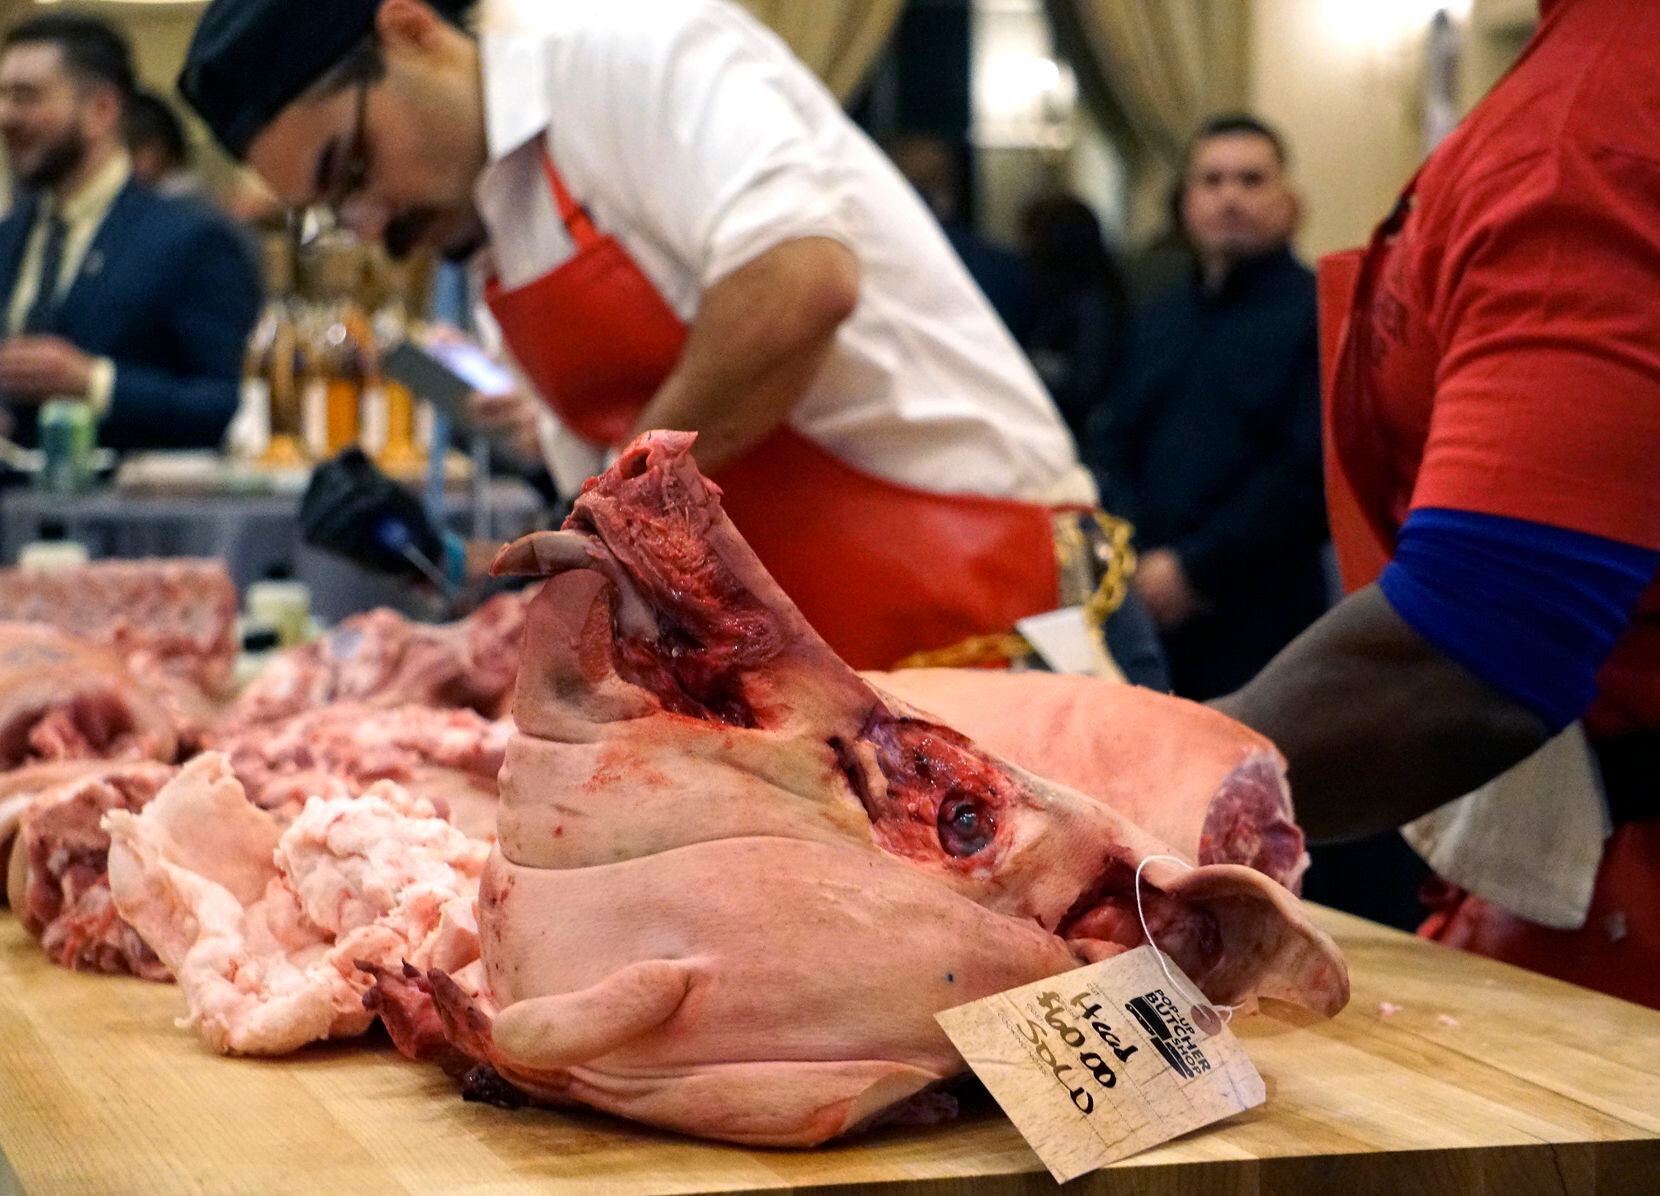 Local butchers cut up a pig during a fundraiser at Cochon555 at the Four Seasons Hotel in...